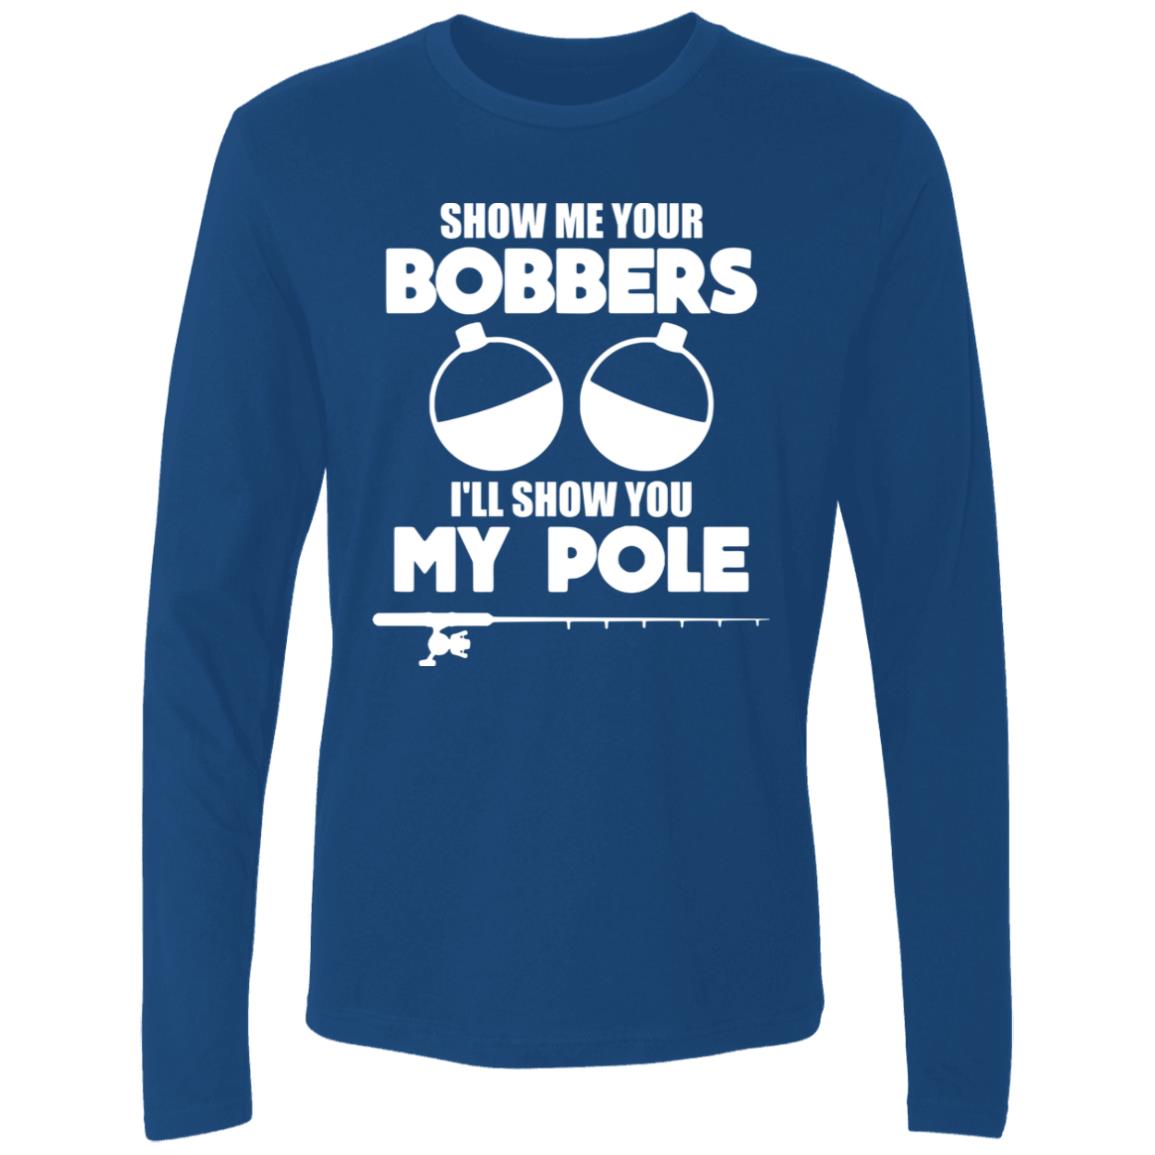 HRCL FL - Show Me Your Bobbers I'll Show You My Pole - 2 Sided NL3601 Men's Premium LS